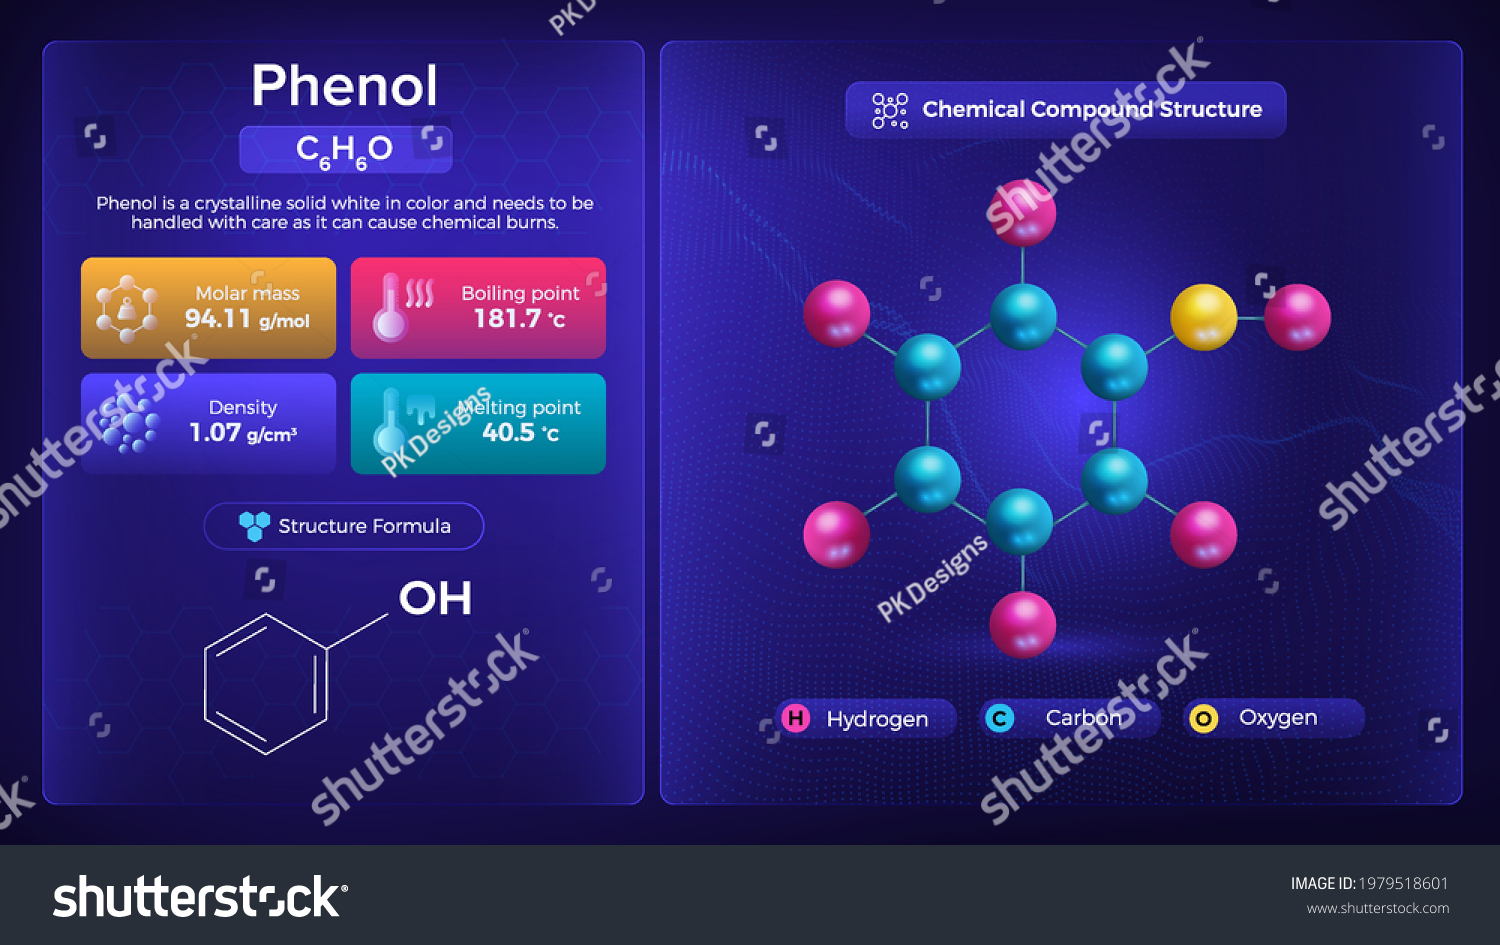 Phenol Properties Chemical Compound Structure Stock Vector (Royalty ...